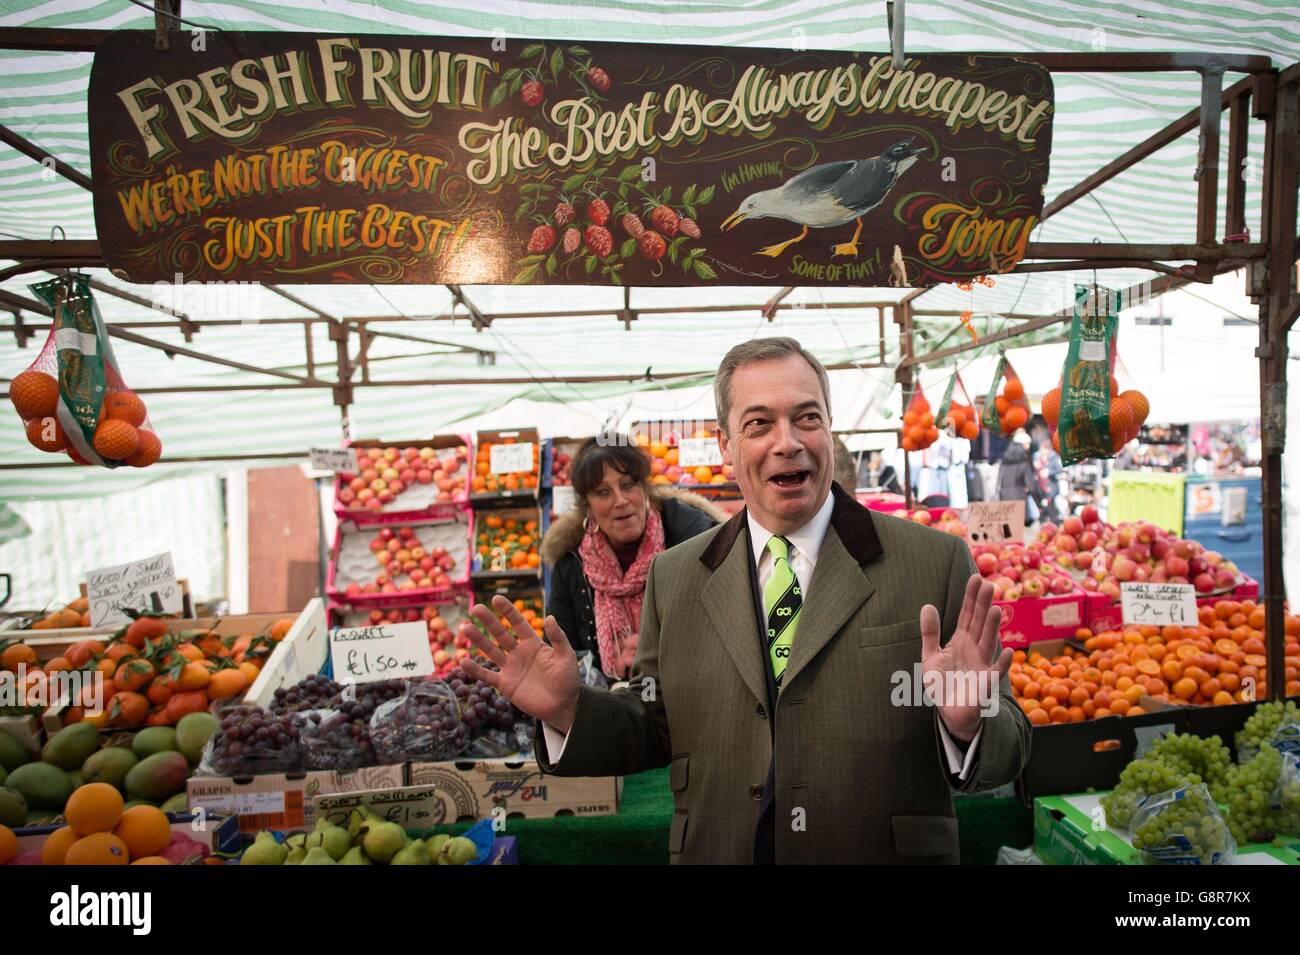 UKIP leader Nigel Farage campaigns for Britain to leave the EU during a walkabout, in support of Brexit campaign's 'super Saturday', in Romford Market in Essex where he met shoppers and local Conservative MP Andrew Rosindell. Stock Photo